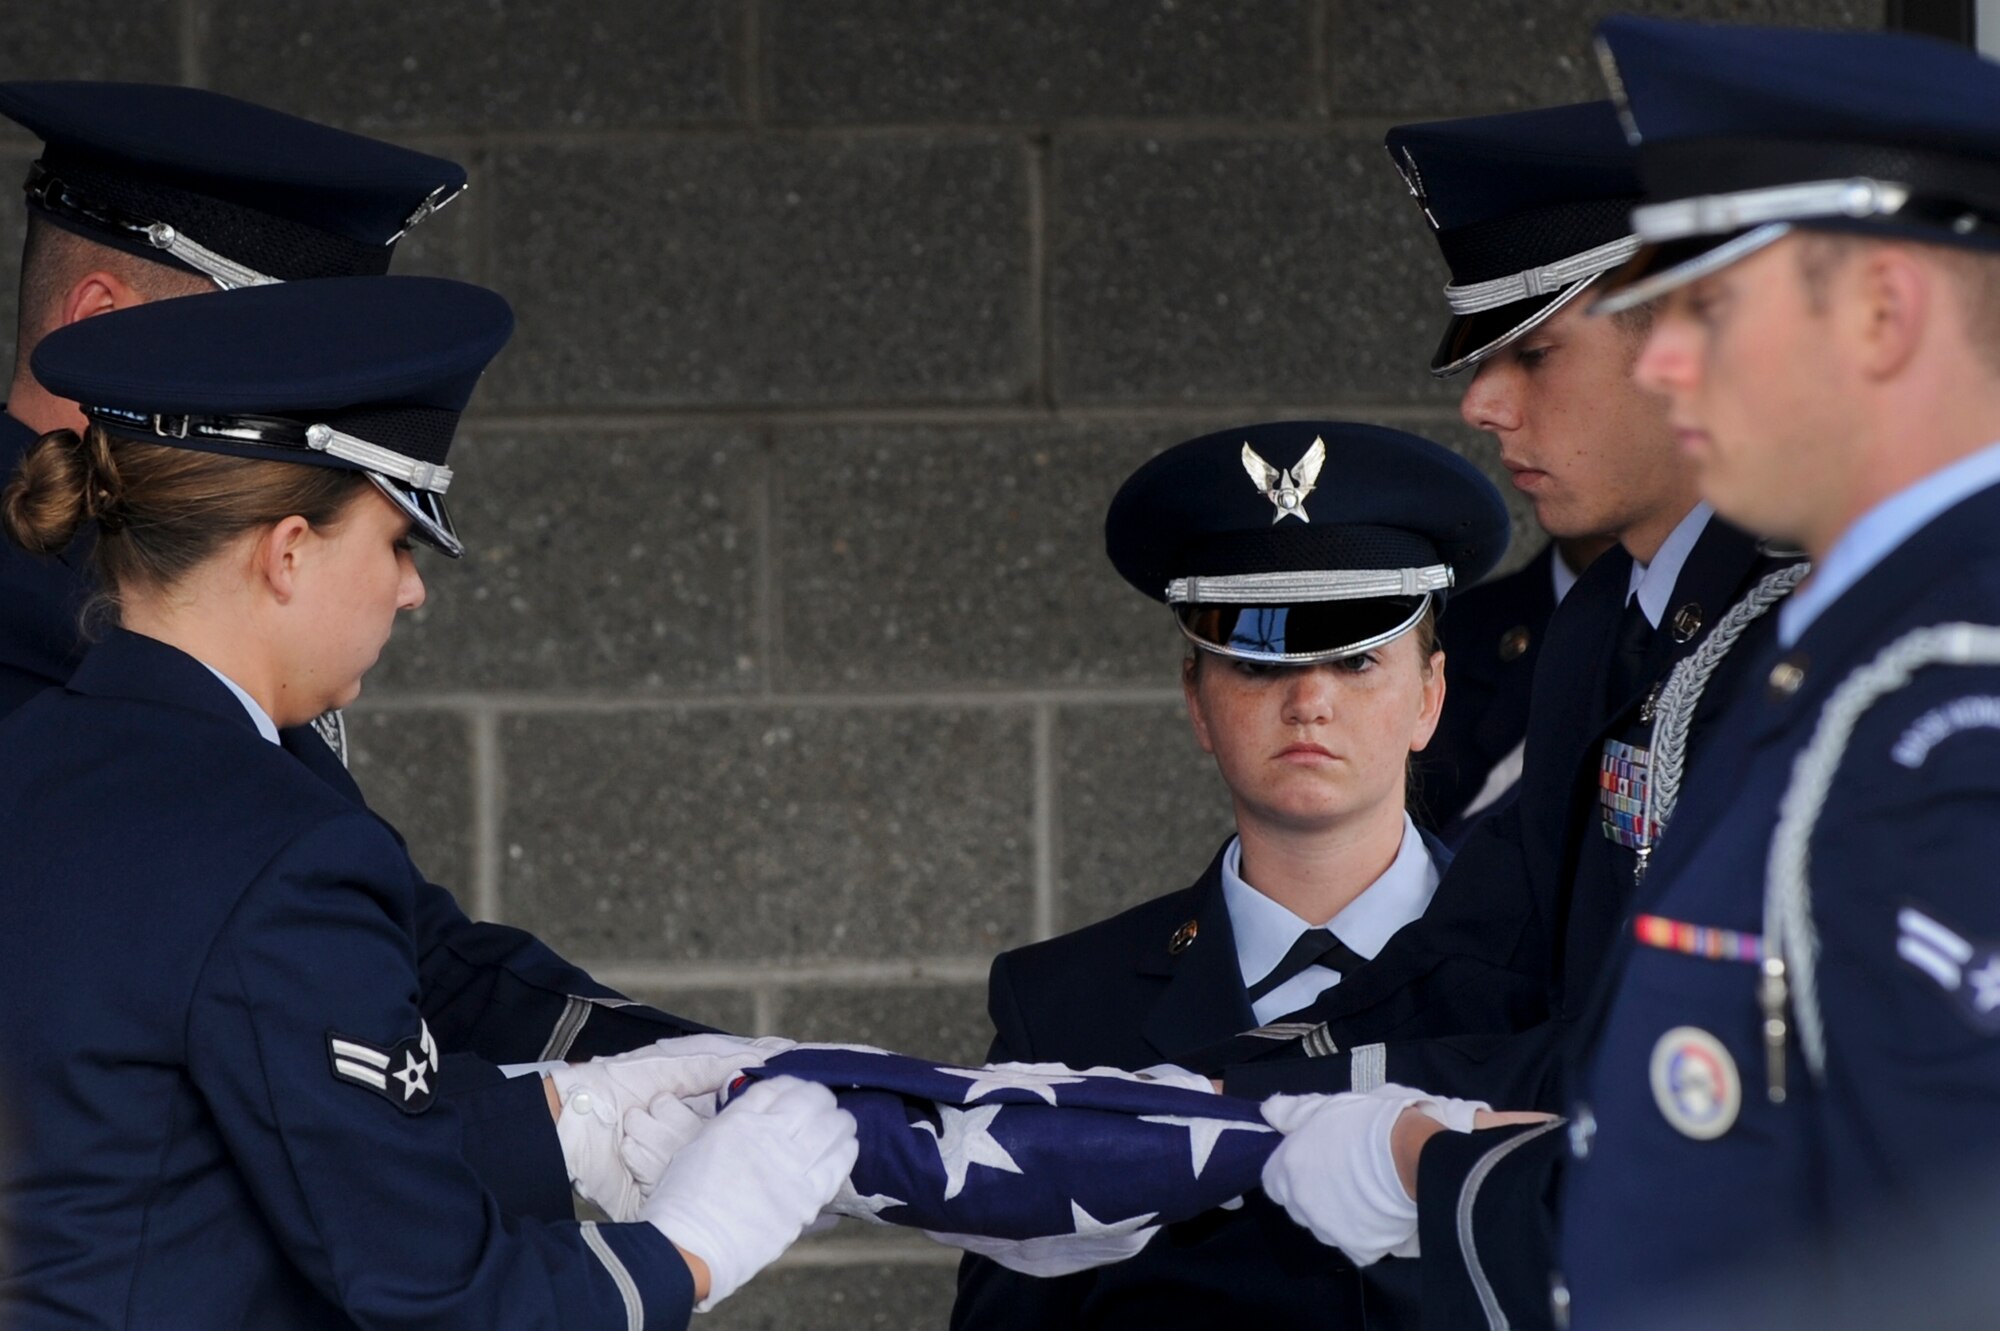 FORT RICHARDSON, Alaska -- Members of the Elmendorf Air Force Base Honor Guard finish folding the flag prior to presenting it to the parents of Staff Sgt. Shawn Rankin during his funeral service, at the Fort Richardson National Cemetery Oct. 15. Rankin of Anchorage, Alaska, was assigned to the 56th Aircraft Maintenance Squadron and served as an F-16 Fighting Falcon crew chief at Luke Air Force Base, Ariz. (U.S. Air Force photo/Staff Sgt. Joshua Garcia)